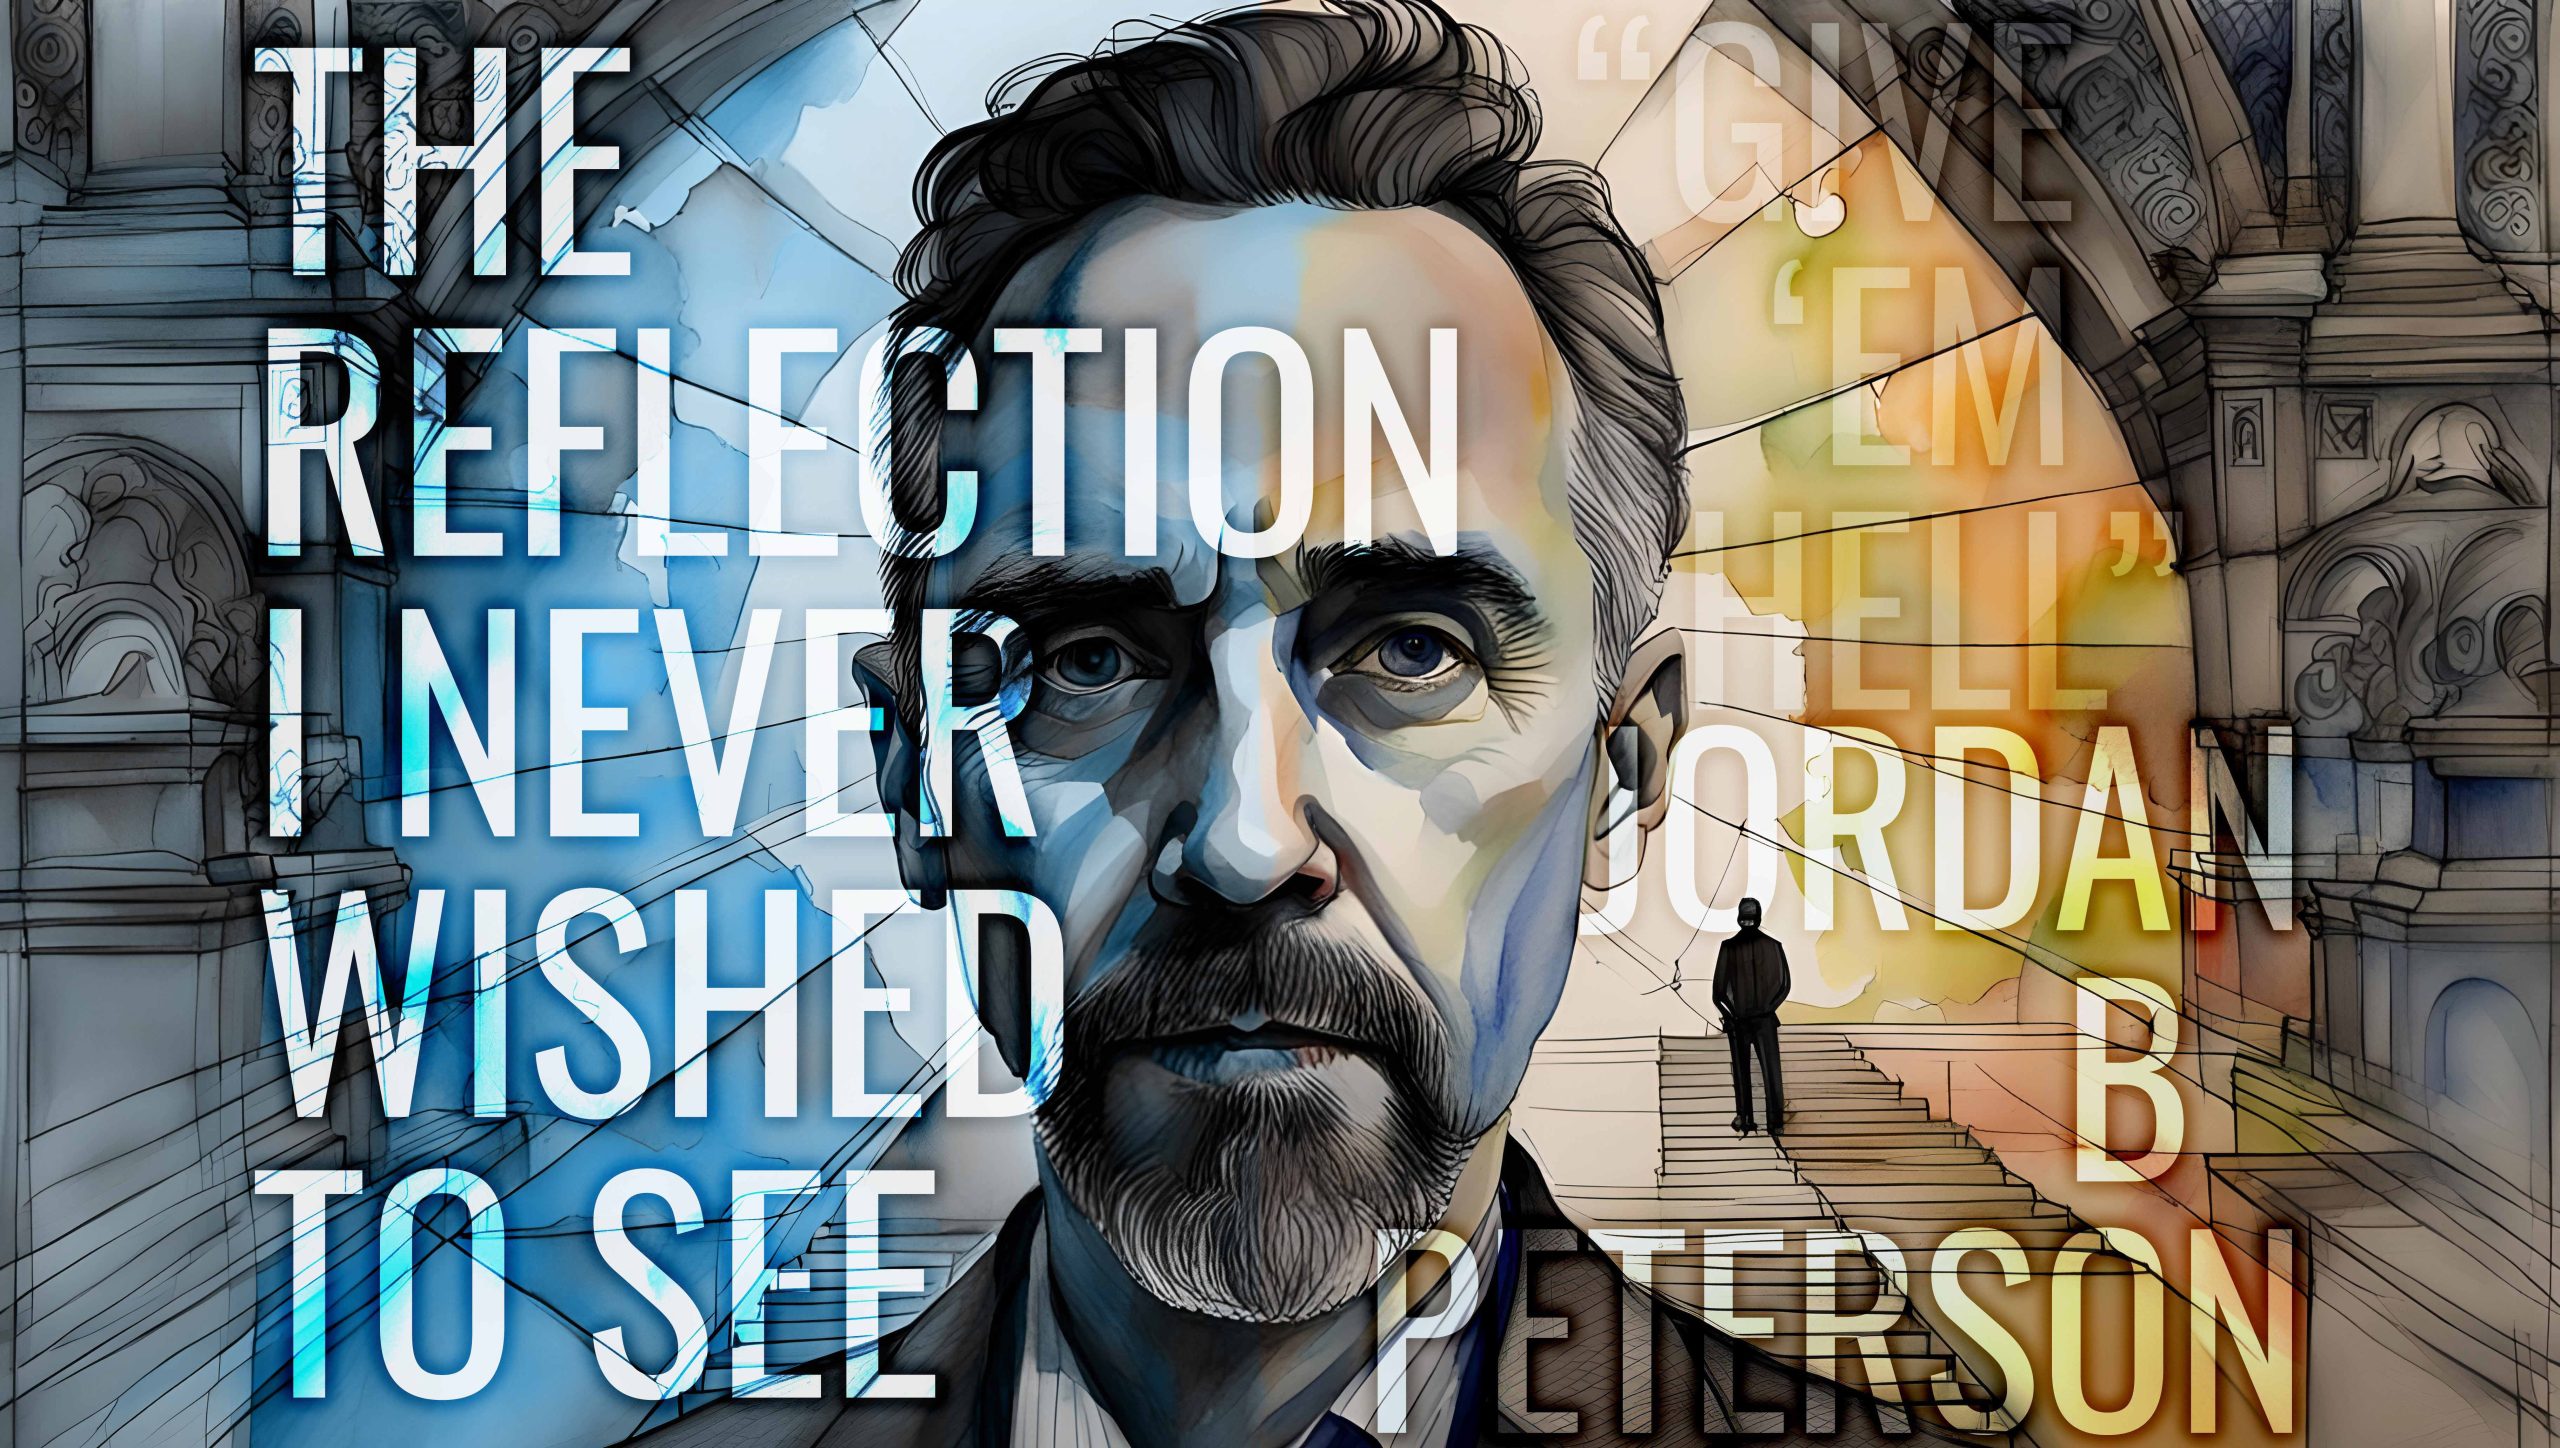 VIDEO: Jordan B Peterson – The Reflection I Never Wished to See